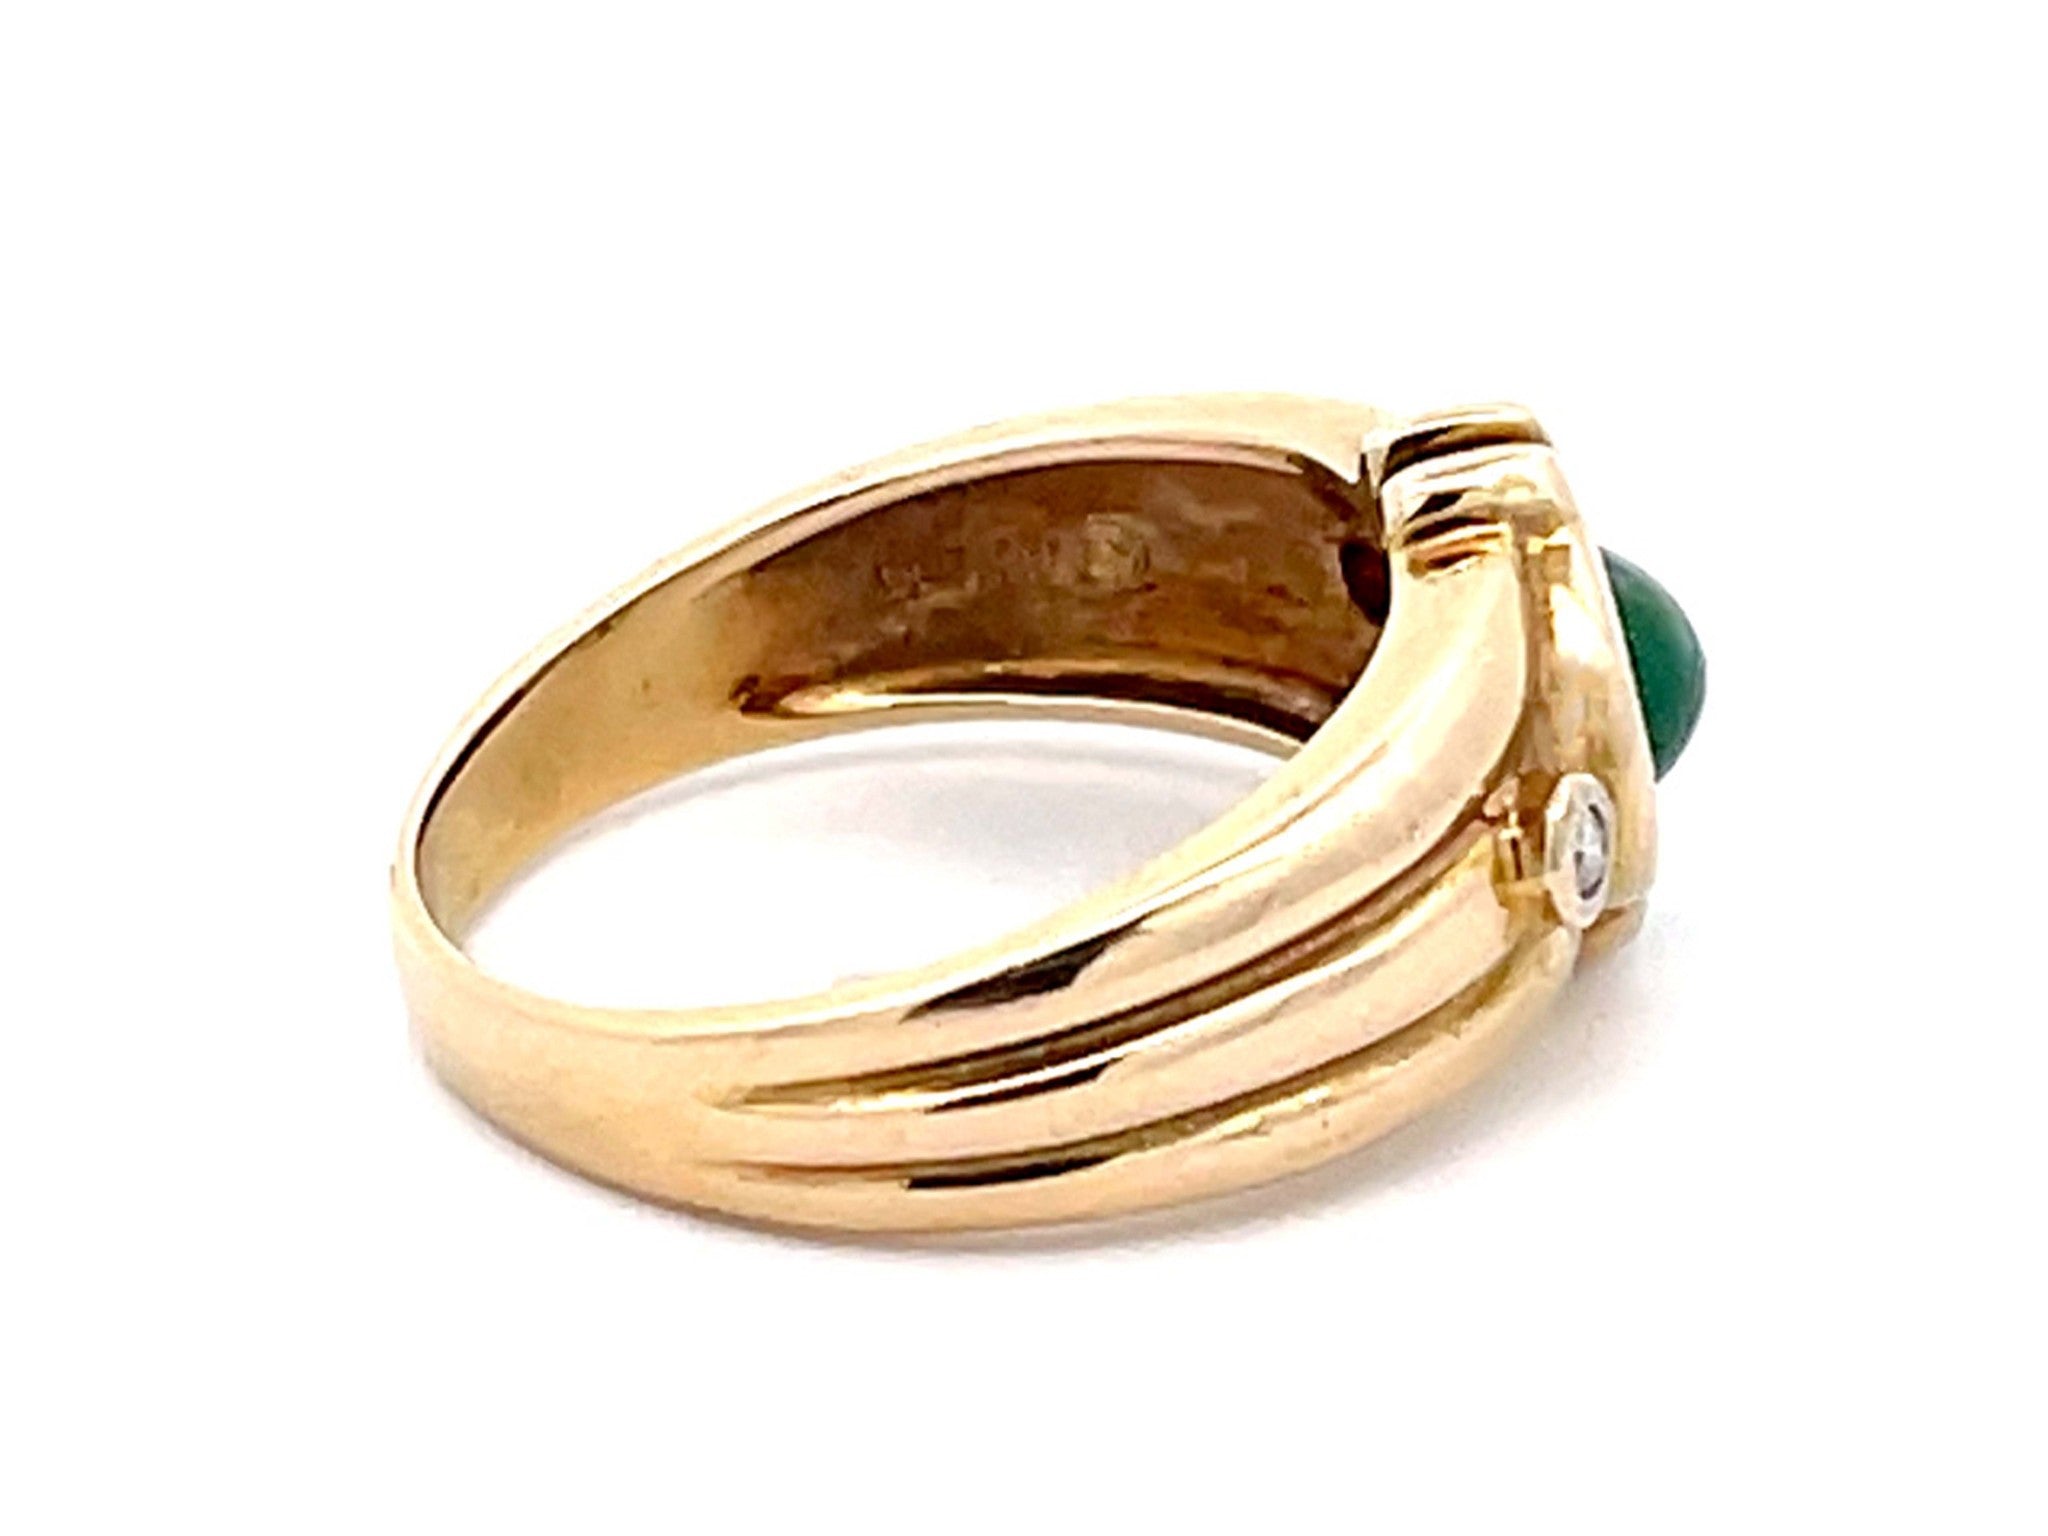 Oval Green Cabochon Emerald and Diamond Ring in 14k Yellow Gold